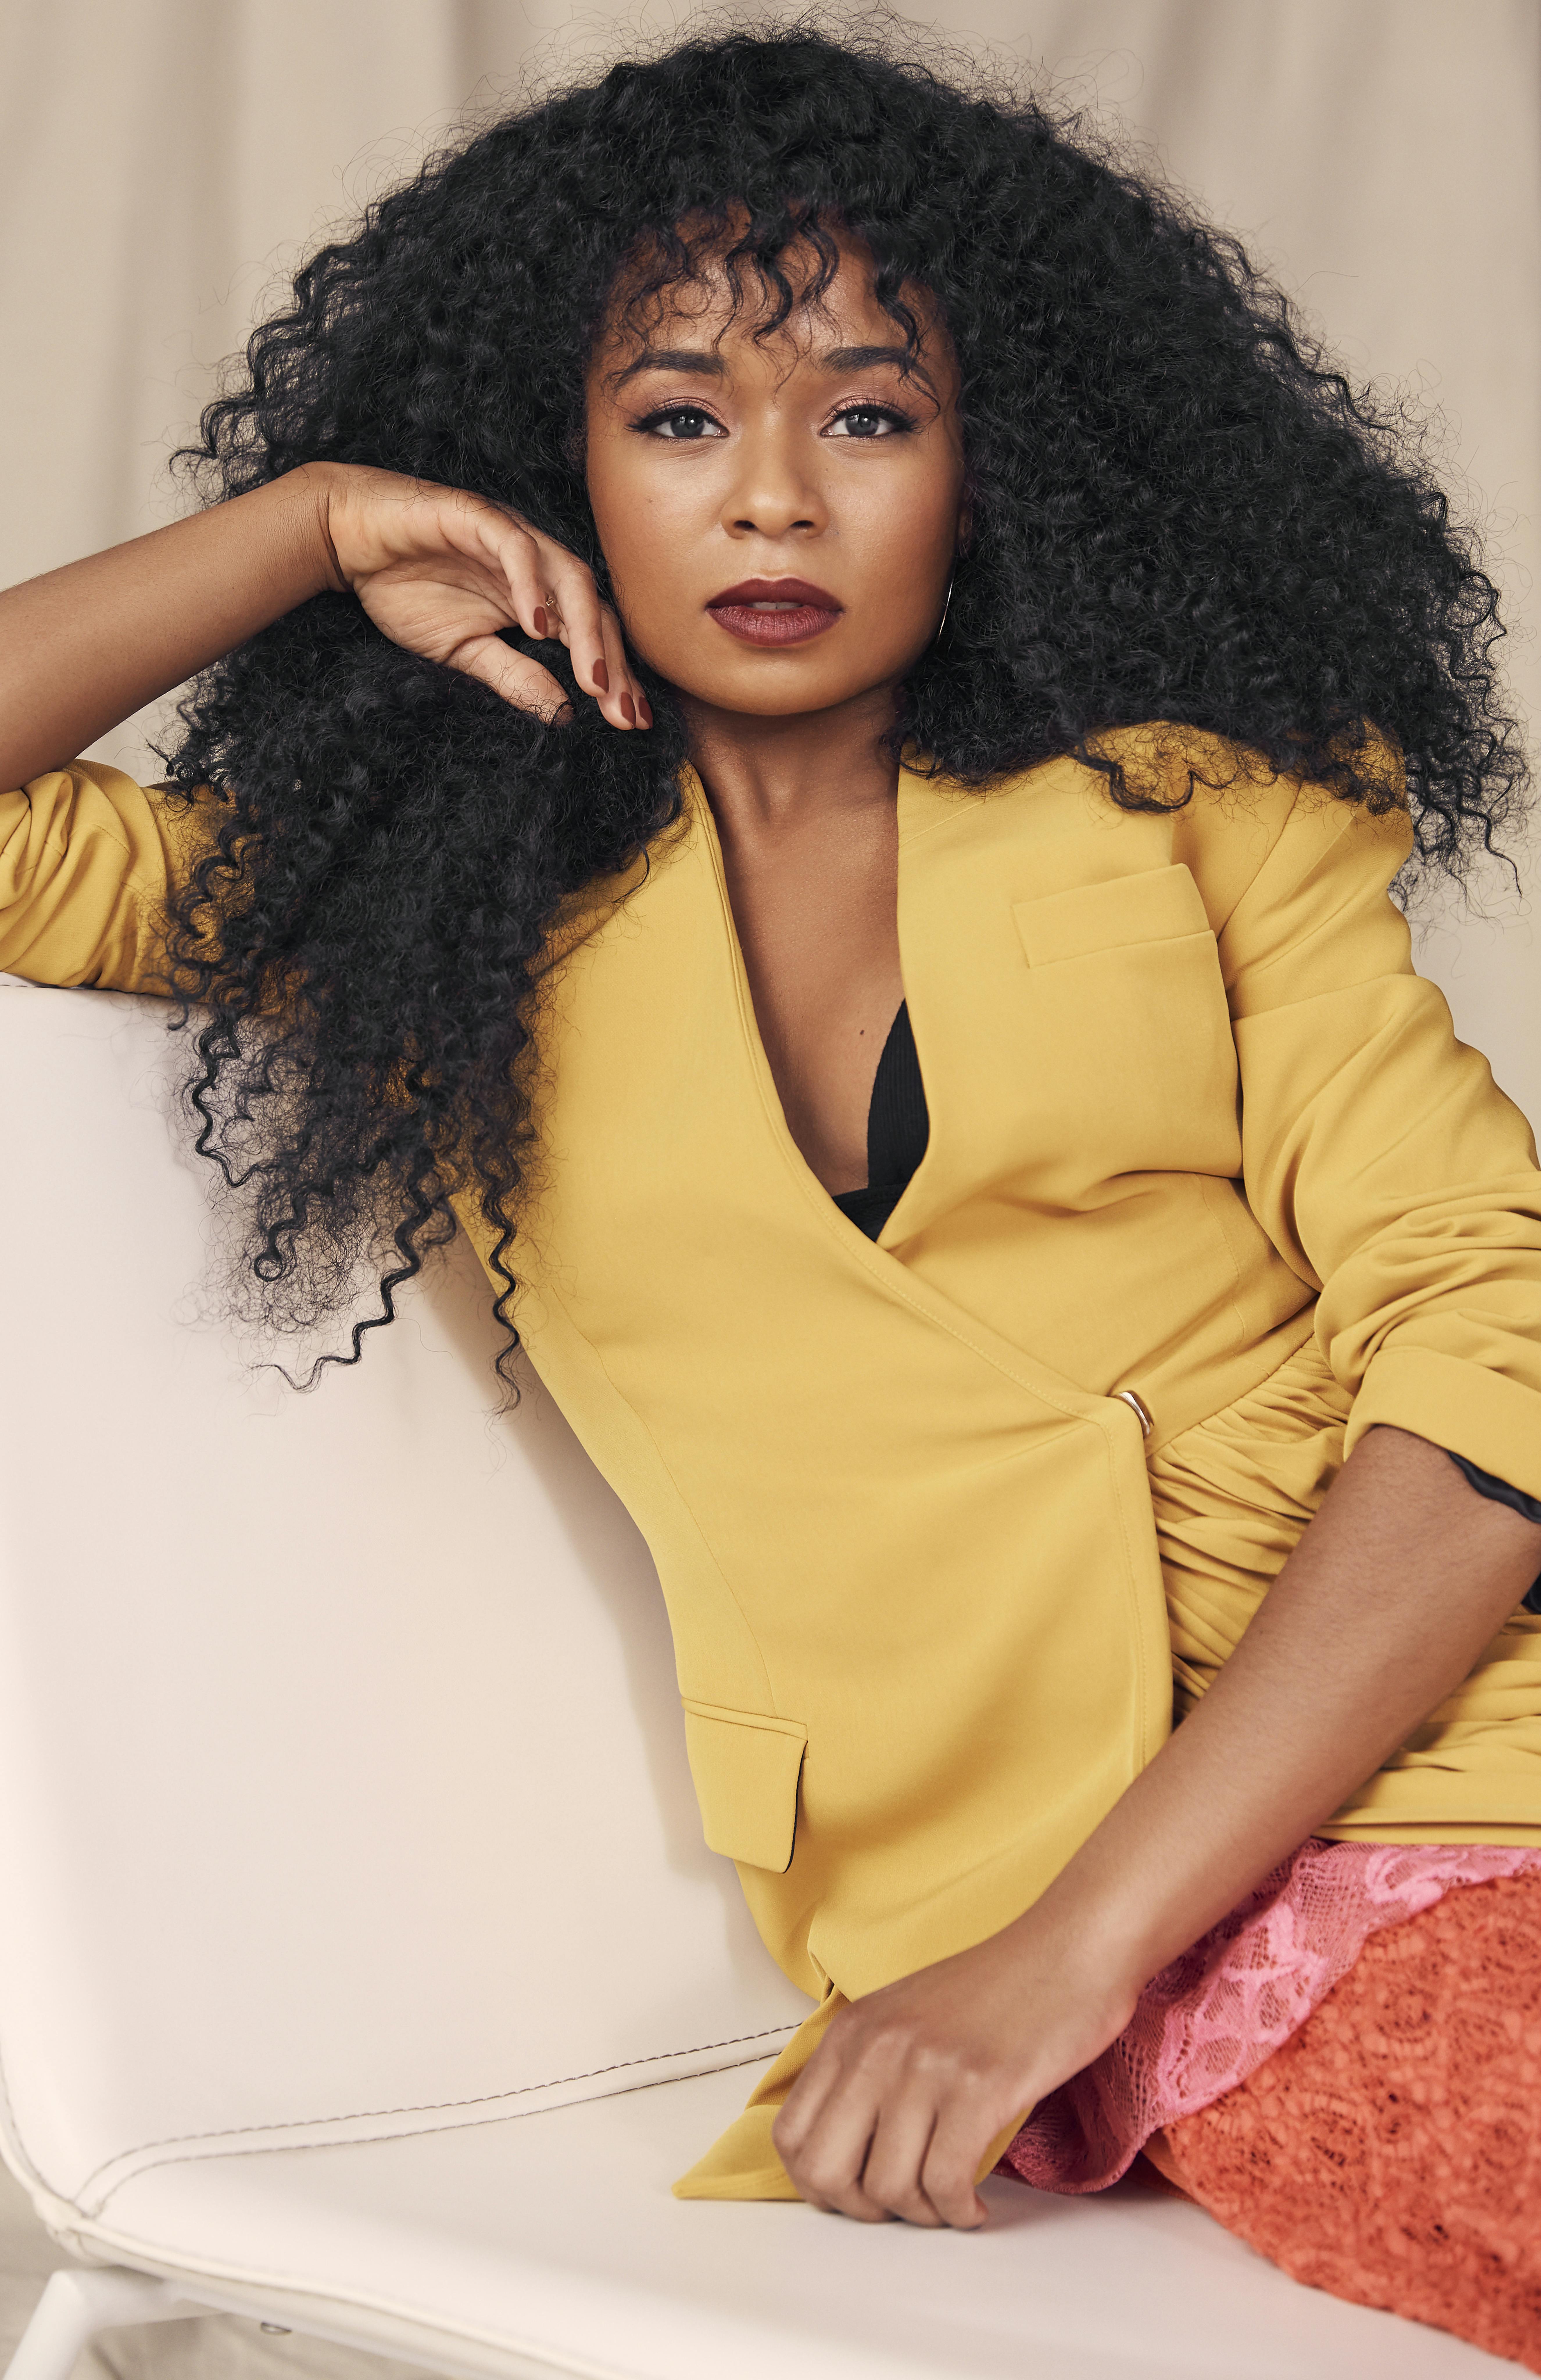 Alexis Floyd sits on an off-white chaise lounge wearing a yellow blazer and lace skirt with pink and orange panels. Floyd's right hand is gracefully framing her face and left hand is seen draped over her lap.